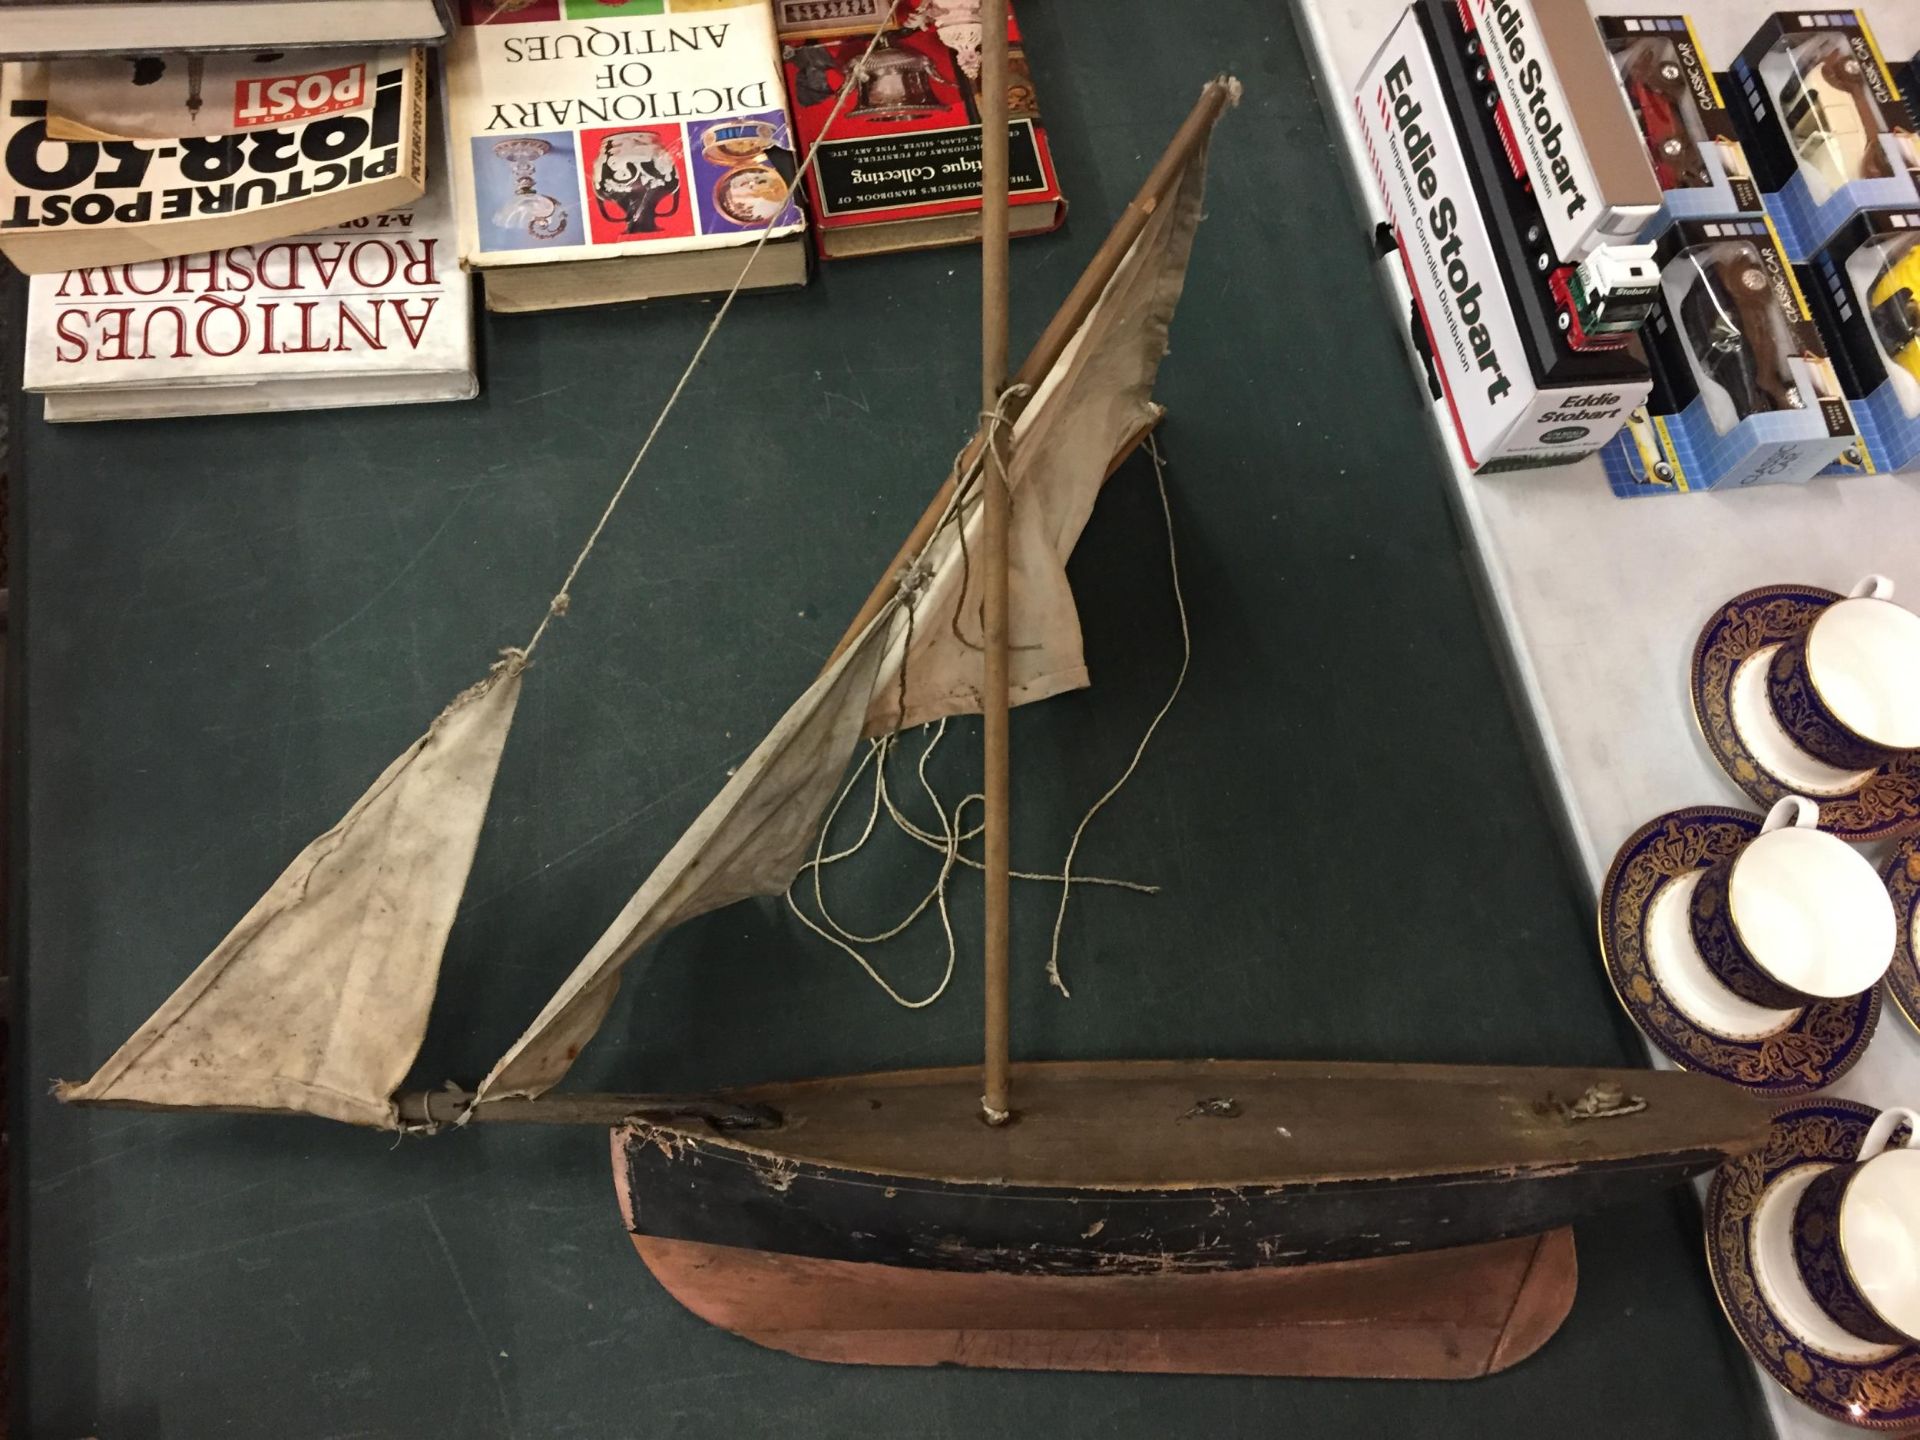 TWO VINTAGE LARGE WOODEN SAILING SHIPS 63CM HIGH - Image 3 of 3